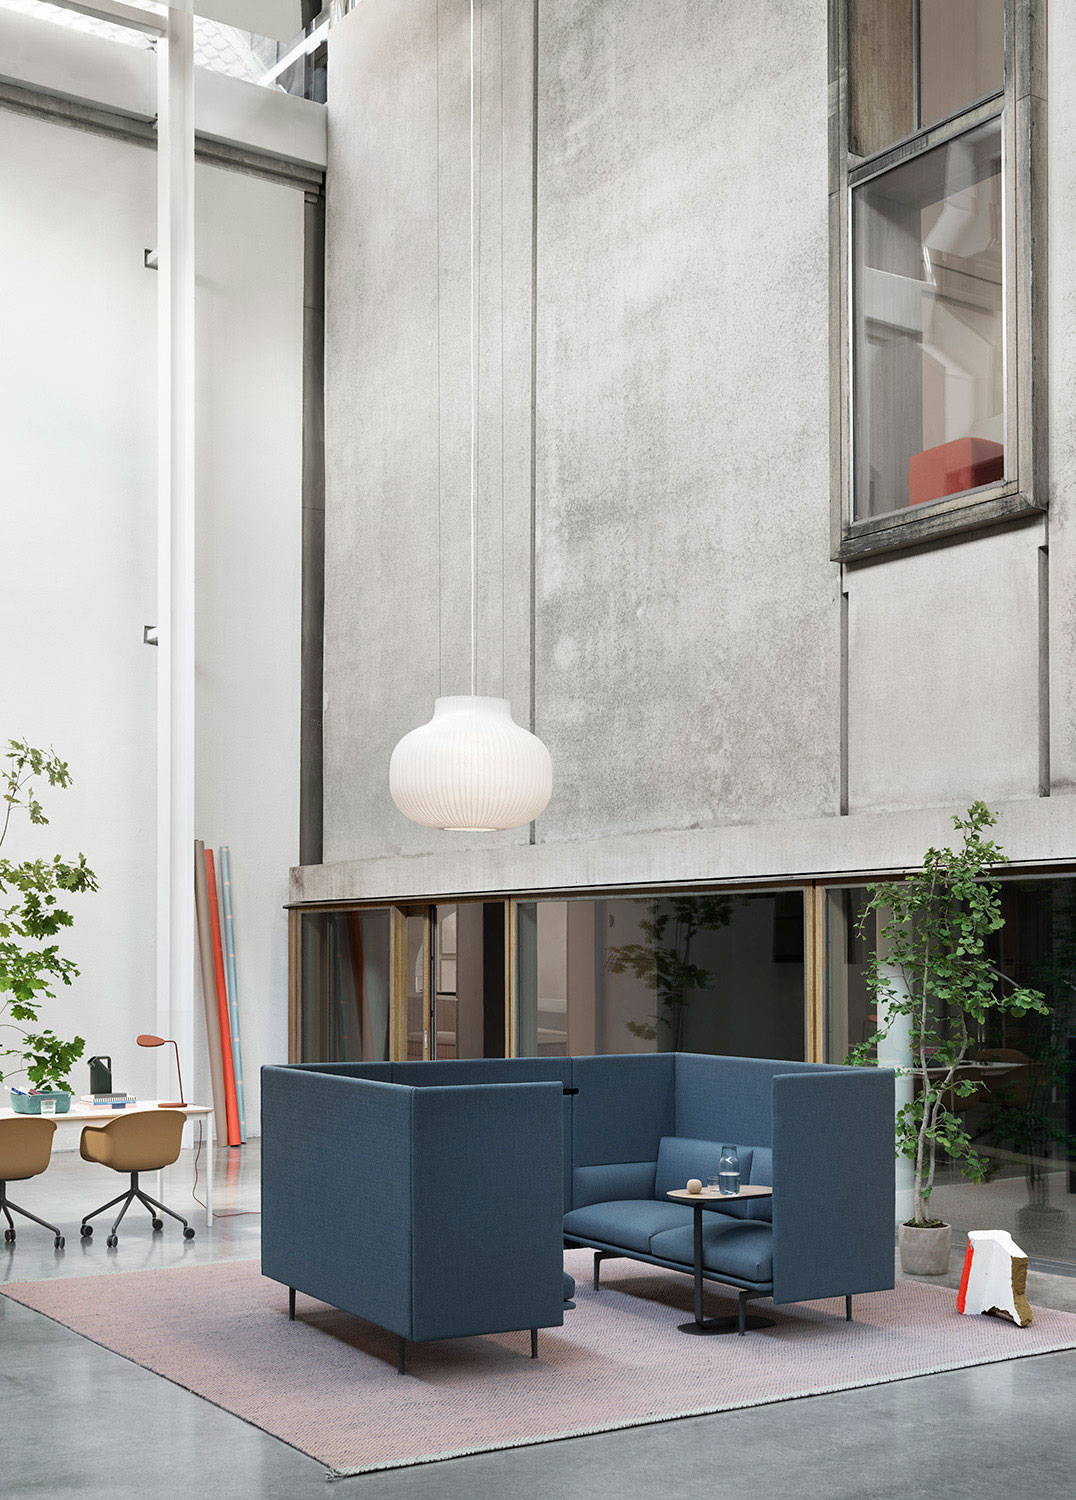 Muuto Outline Highback Panel with Relate Table & Fiber Armchair